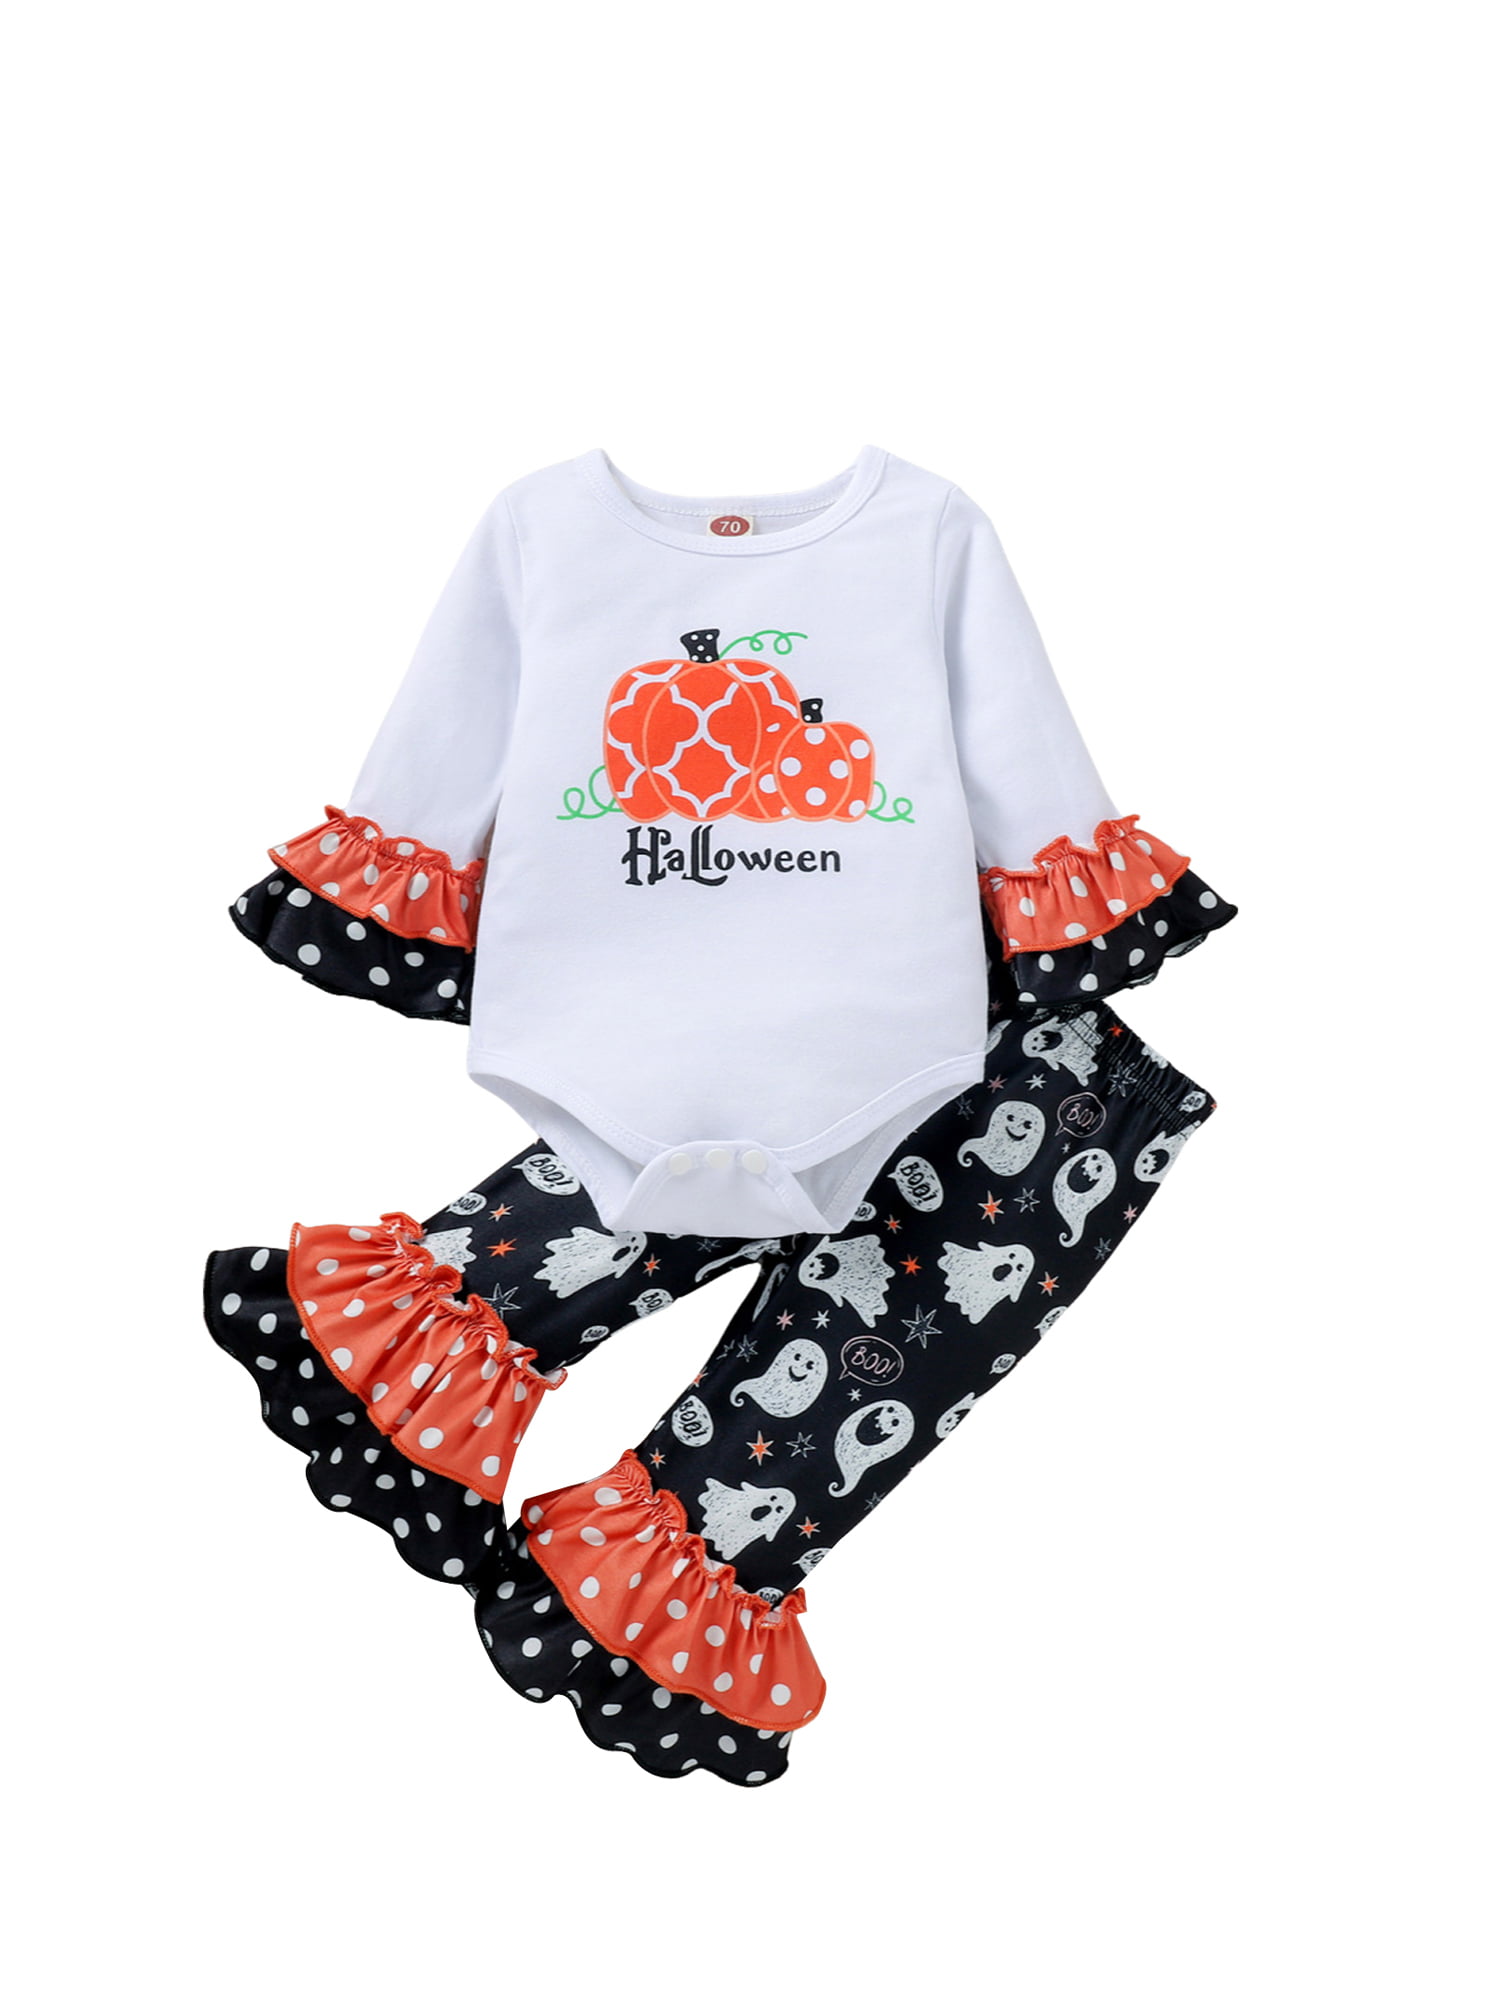 Baby Girl Halloween Outfit for Toddler Infant Tops Pants 2Pcs Set Baby Halloween Costume